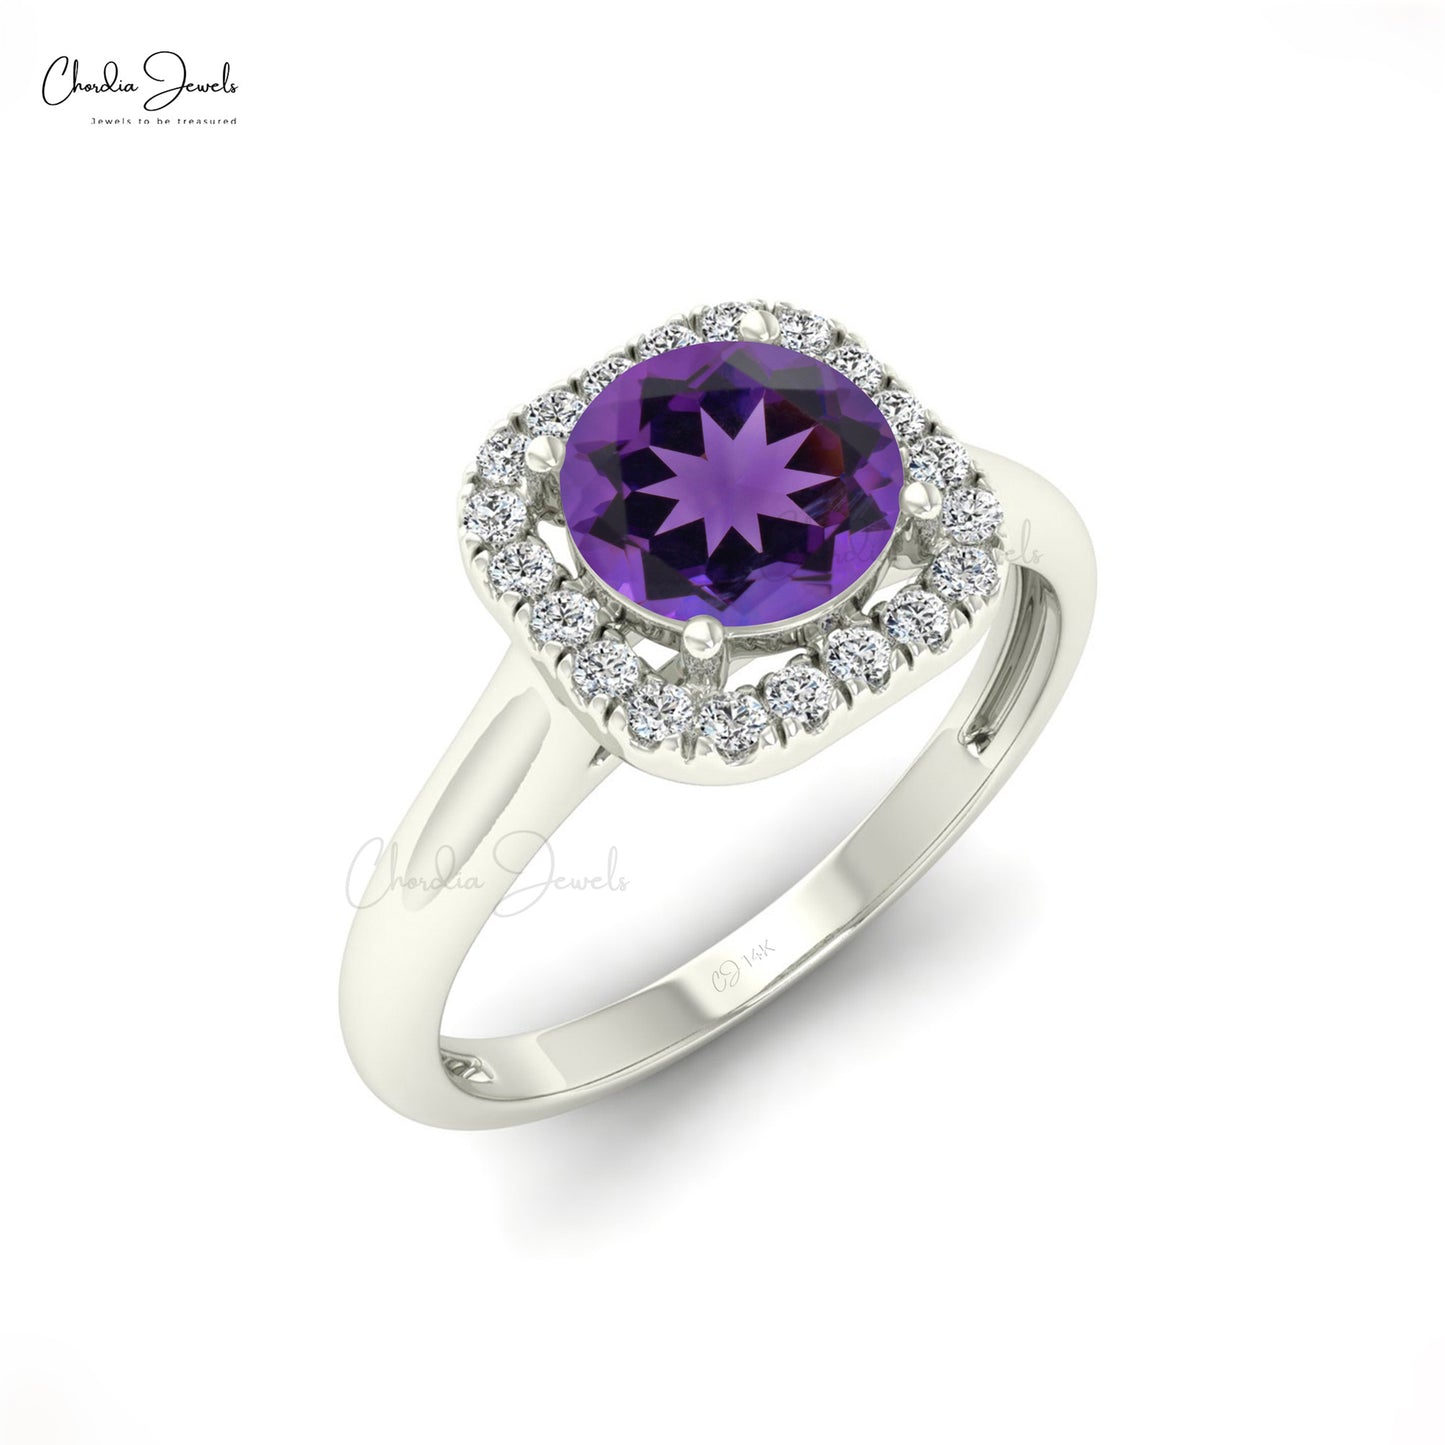 What Are The Benefits Of Wearing An Amethyst Ring On Your Left Hand Finger?